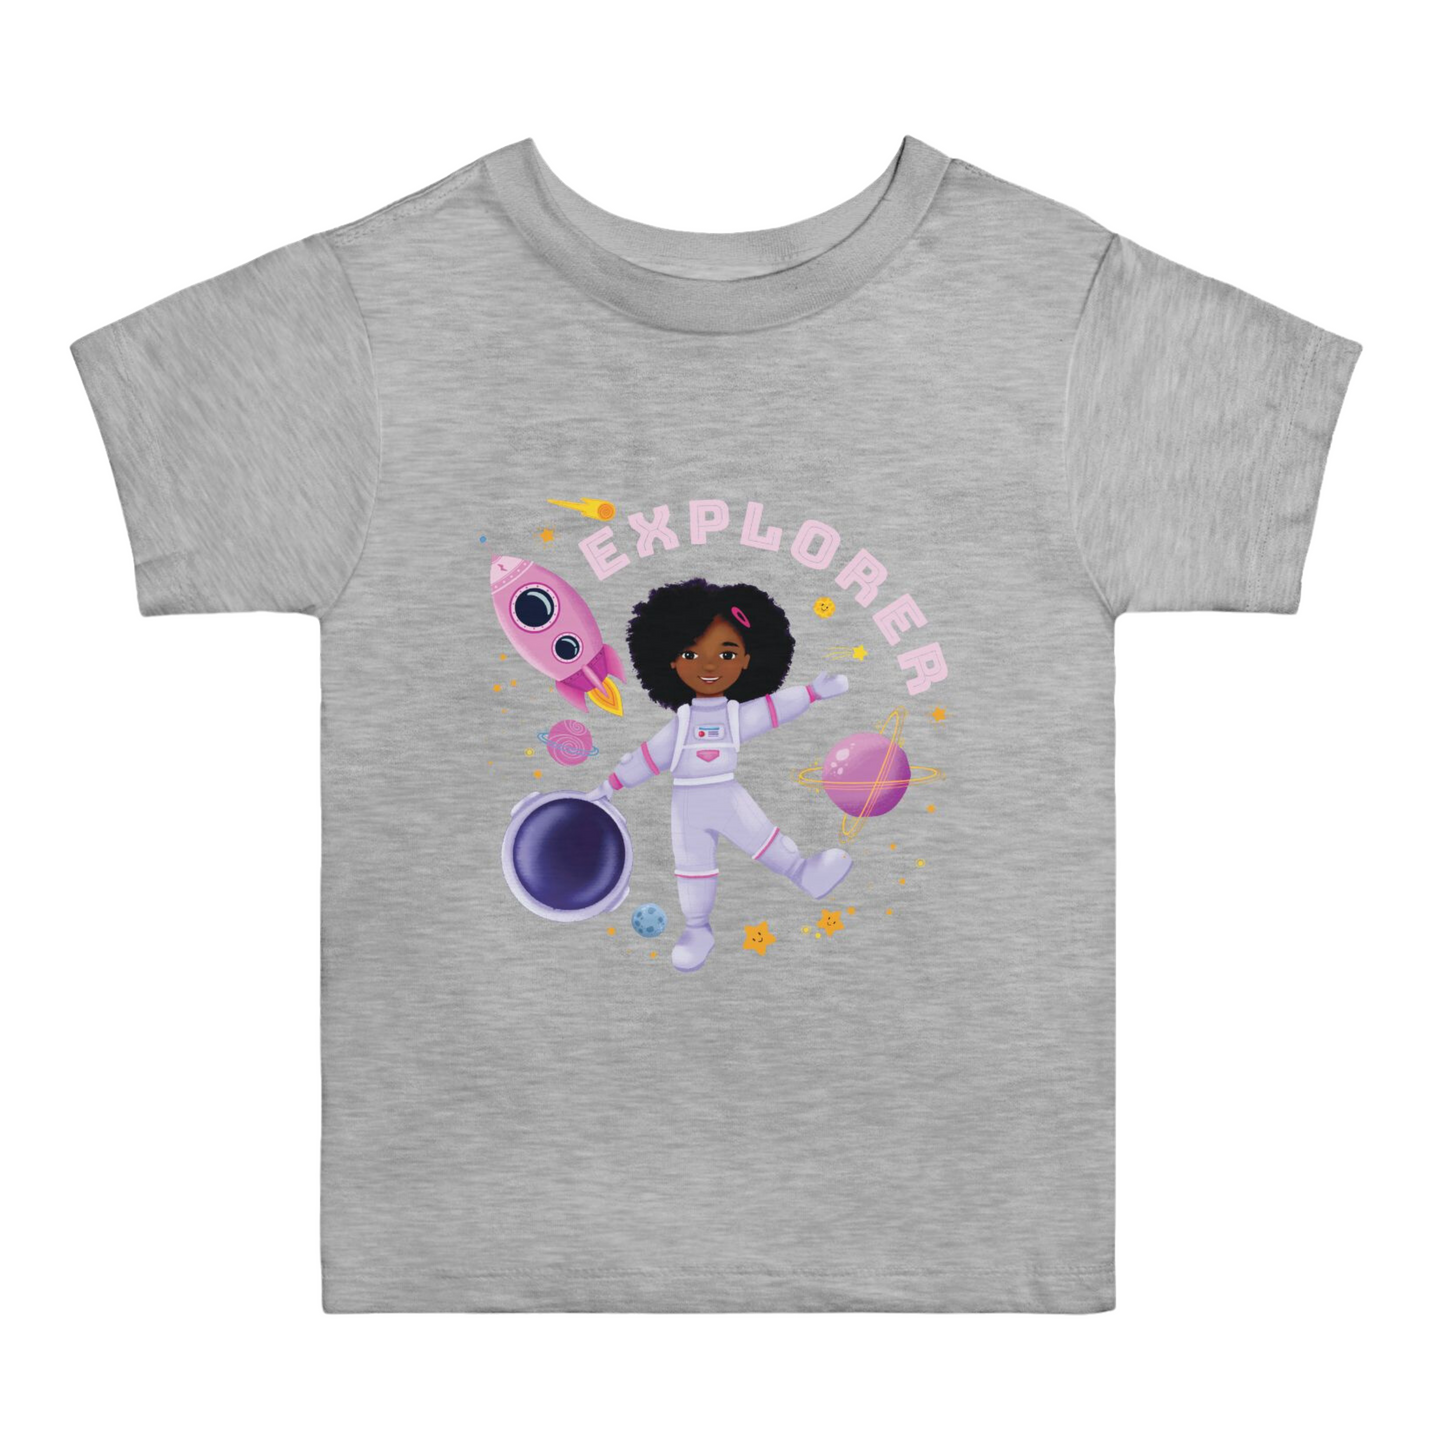 Toddler Space T-Shirt for Girls